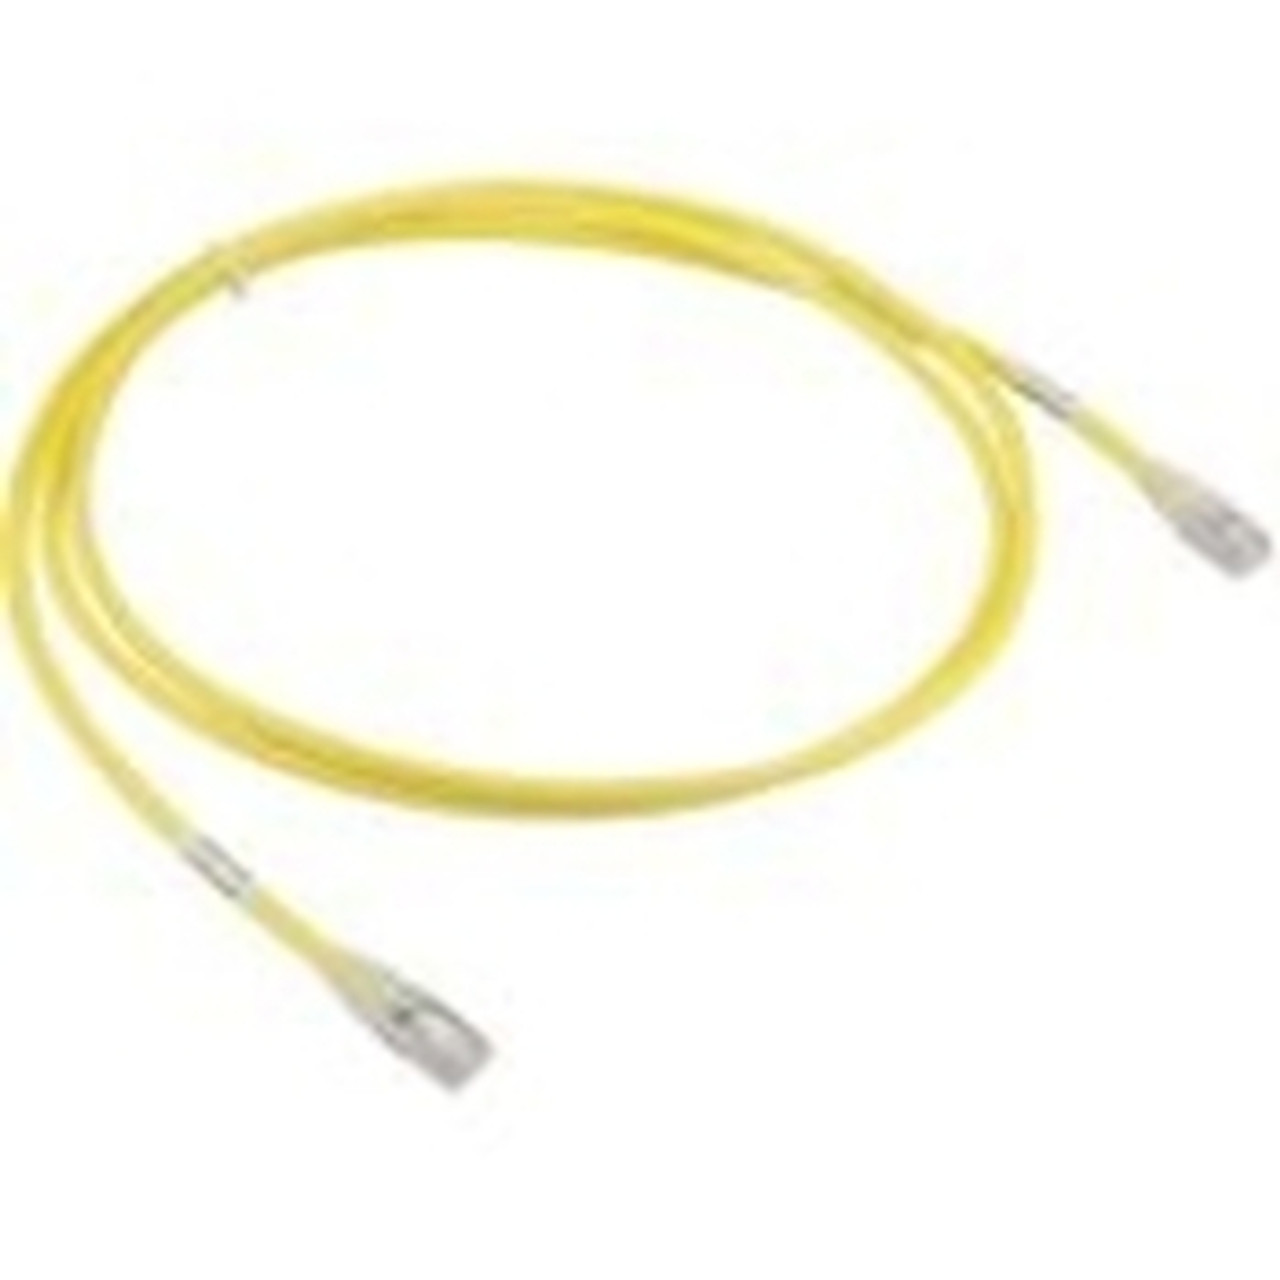 CBL-C6A-YL2M Supermicro 10G RJ45 CAT6A 2m Yellow Cable () Category 6a for Server Switch 6.56 ft 1 x RJ-45 Network 1 x RJ-45 Network Yellow